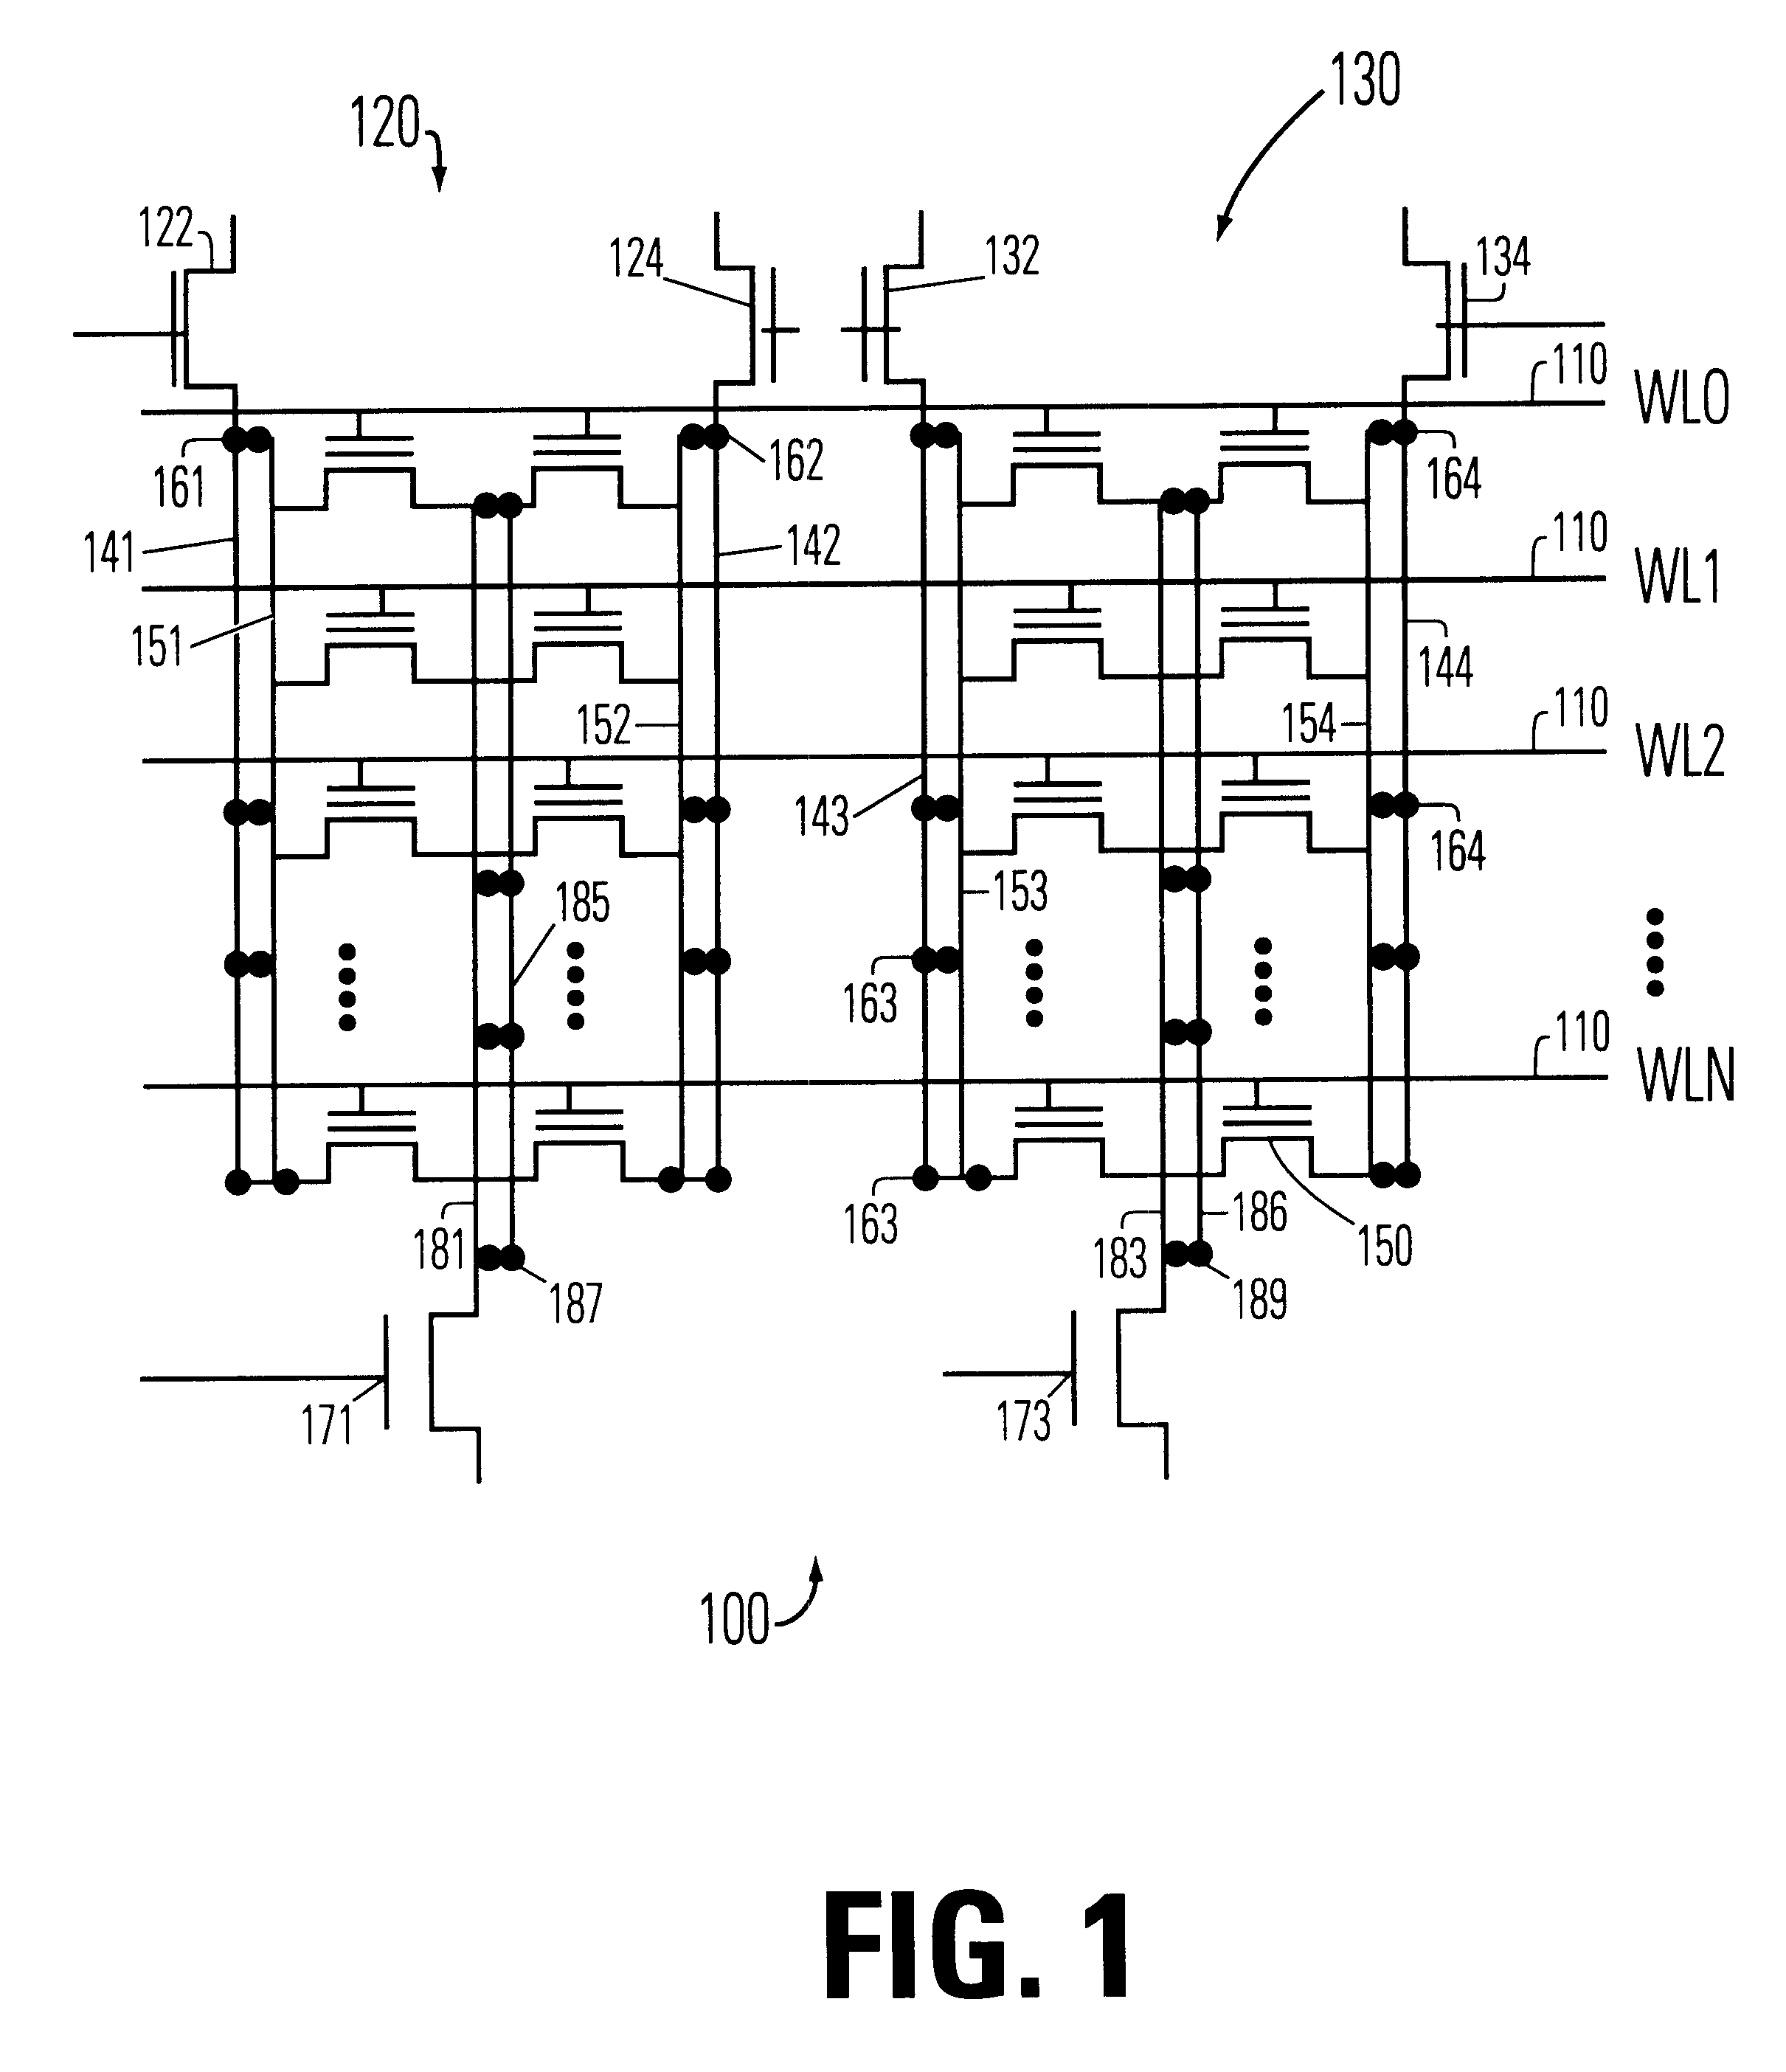 Contact array structure for buried type transistor